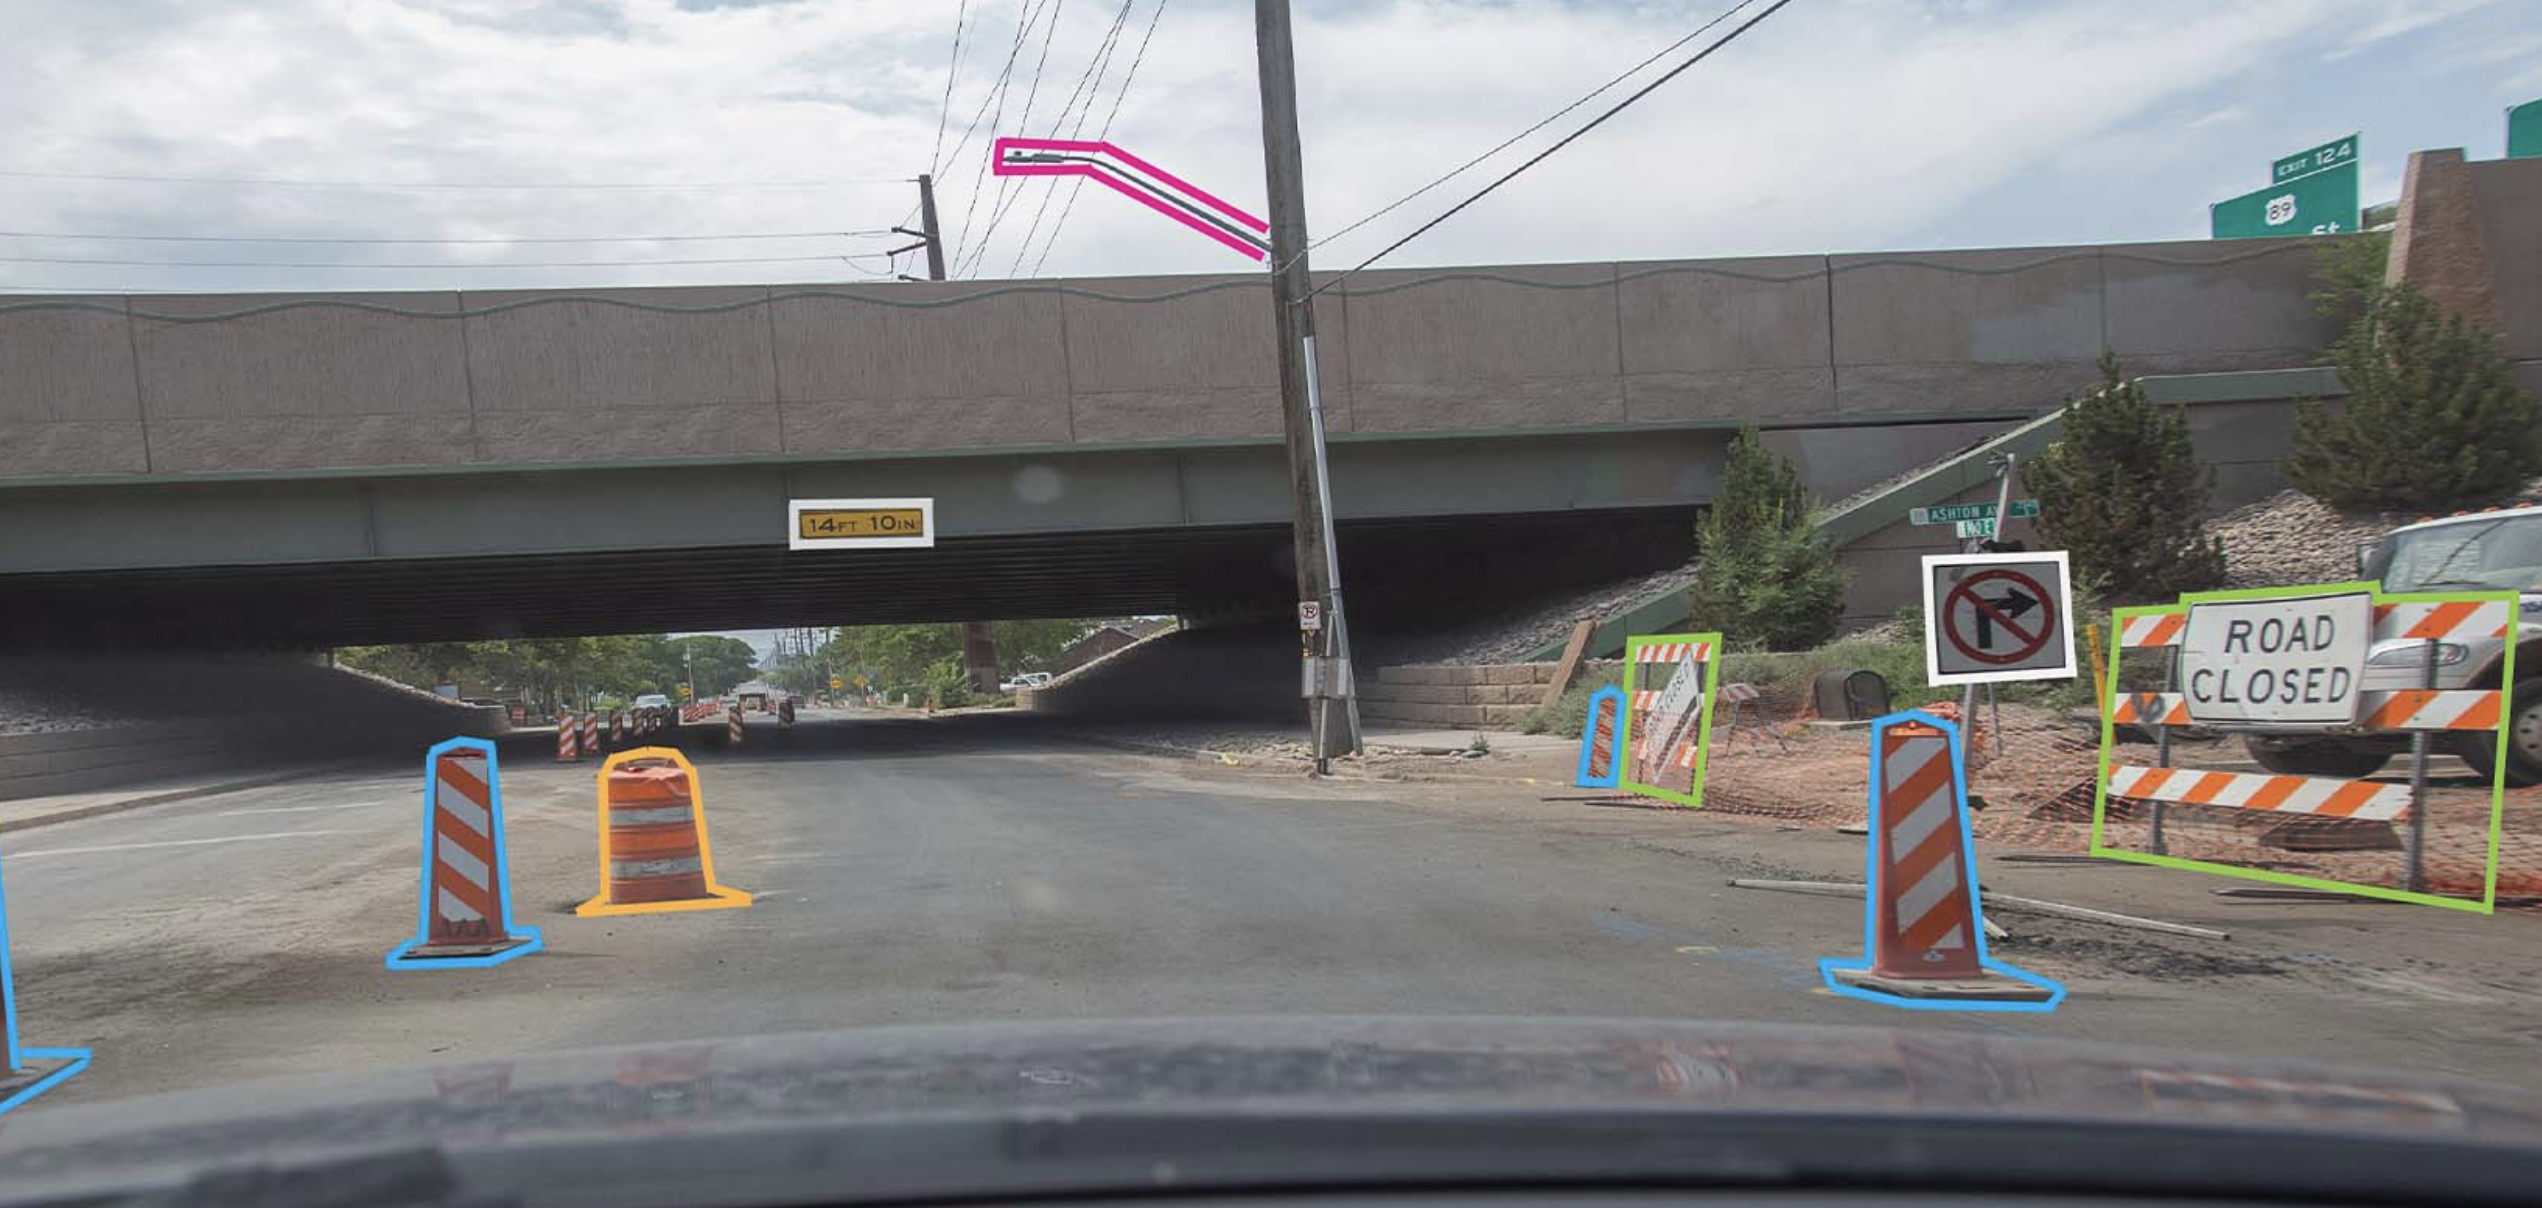 An image showing traffic cones and road closed signs highlighted in bright colors.